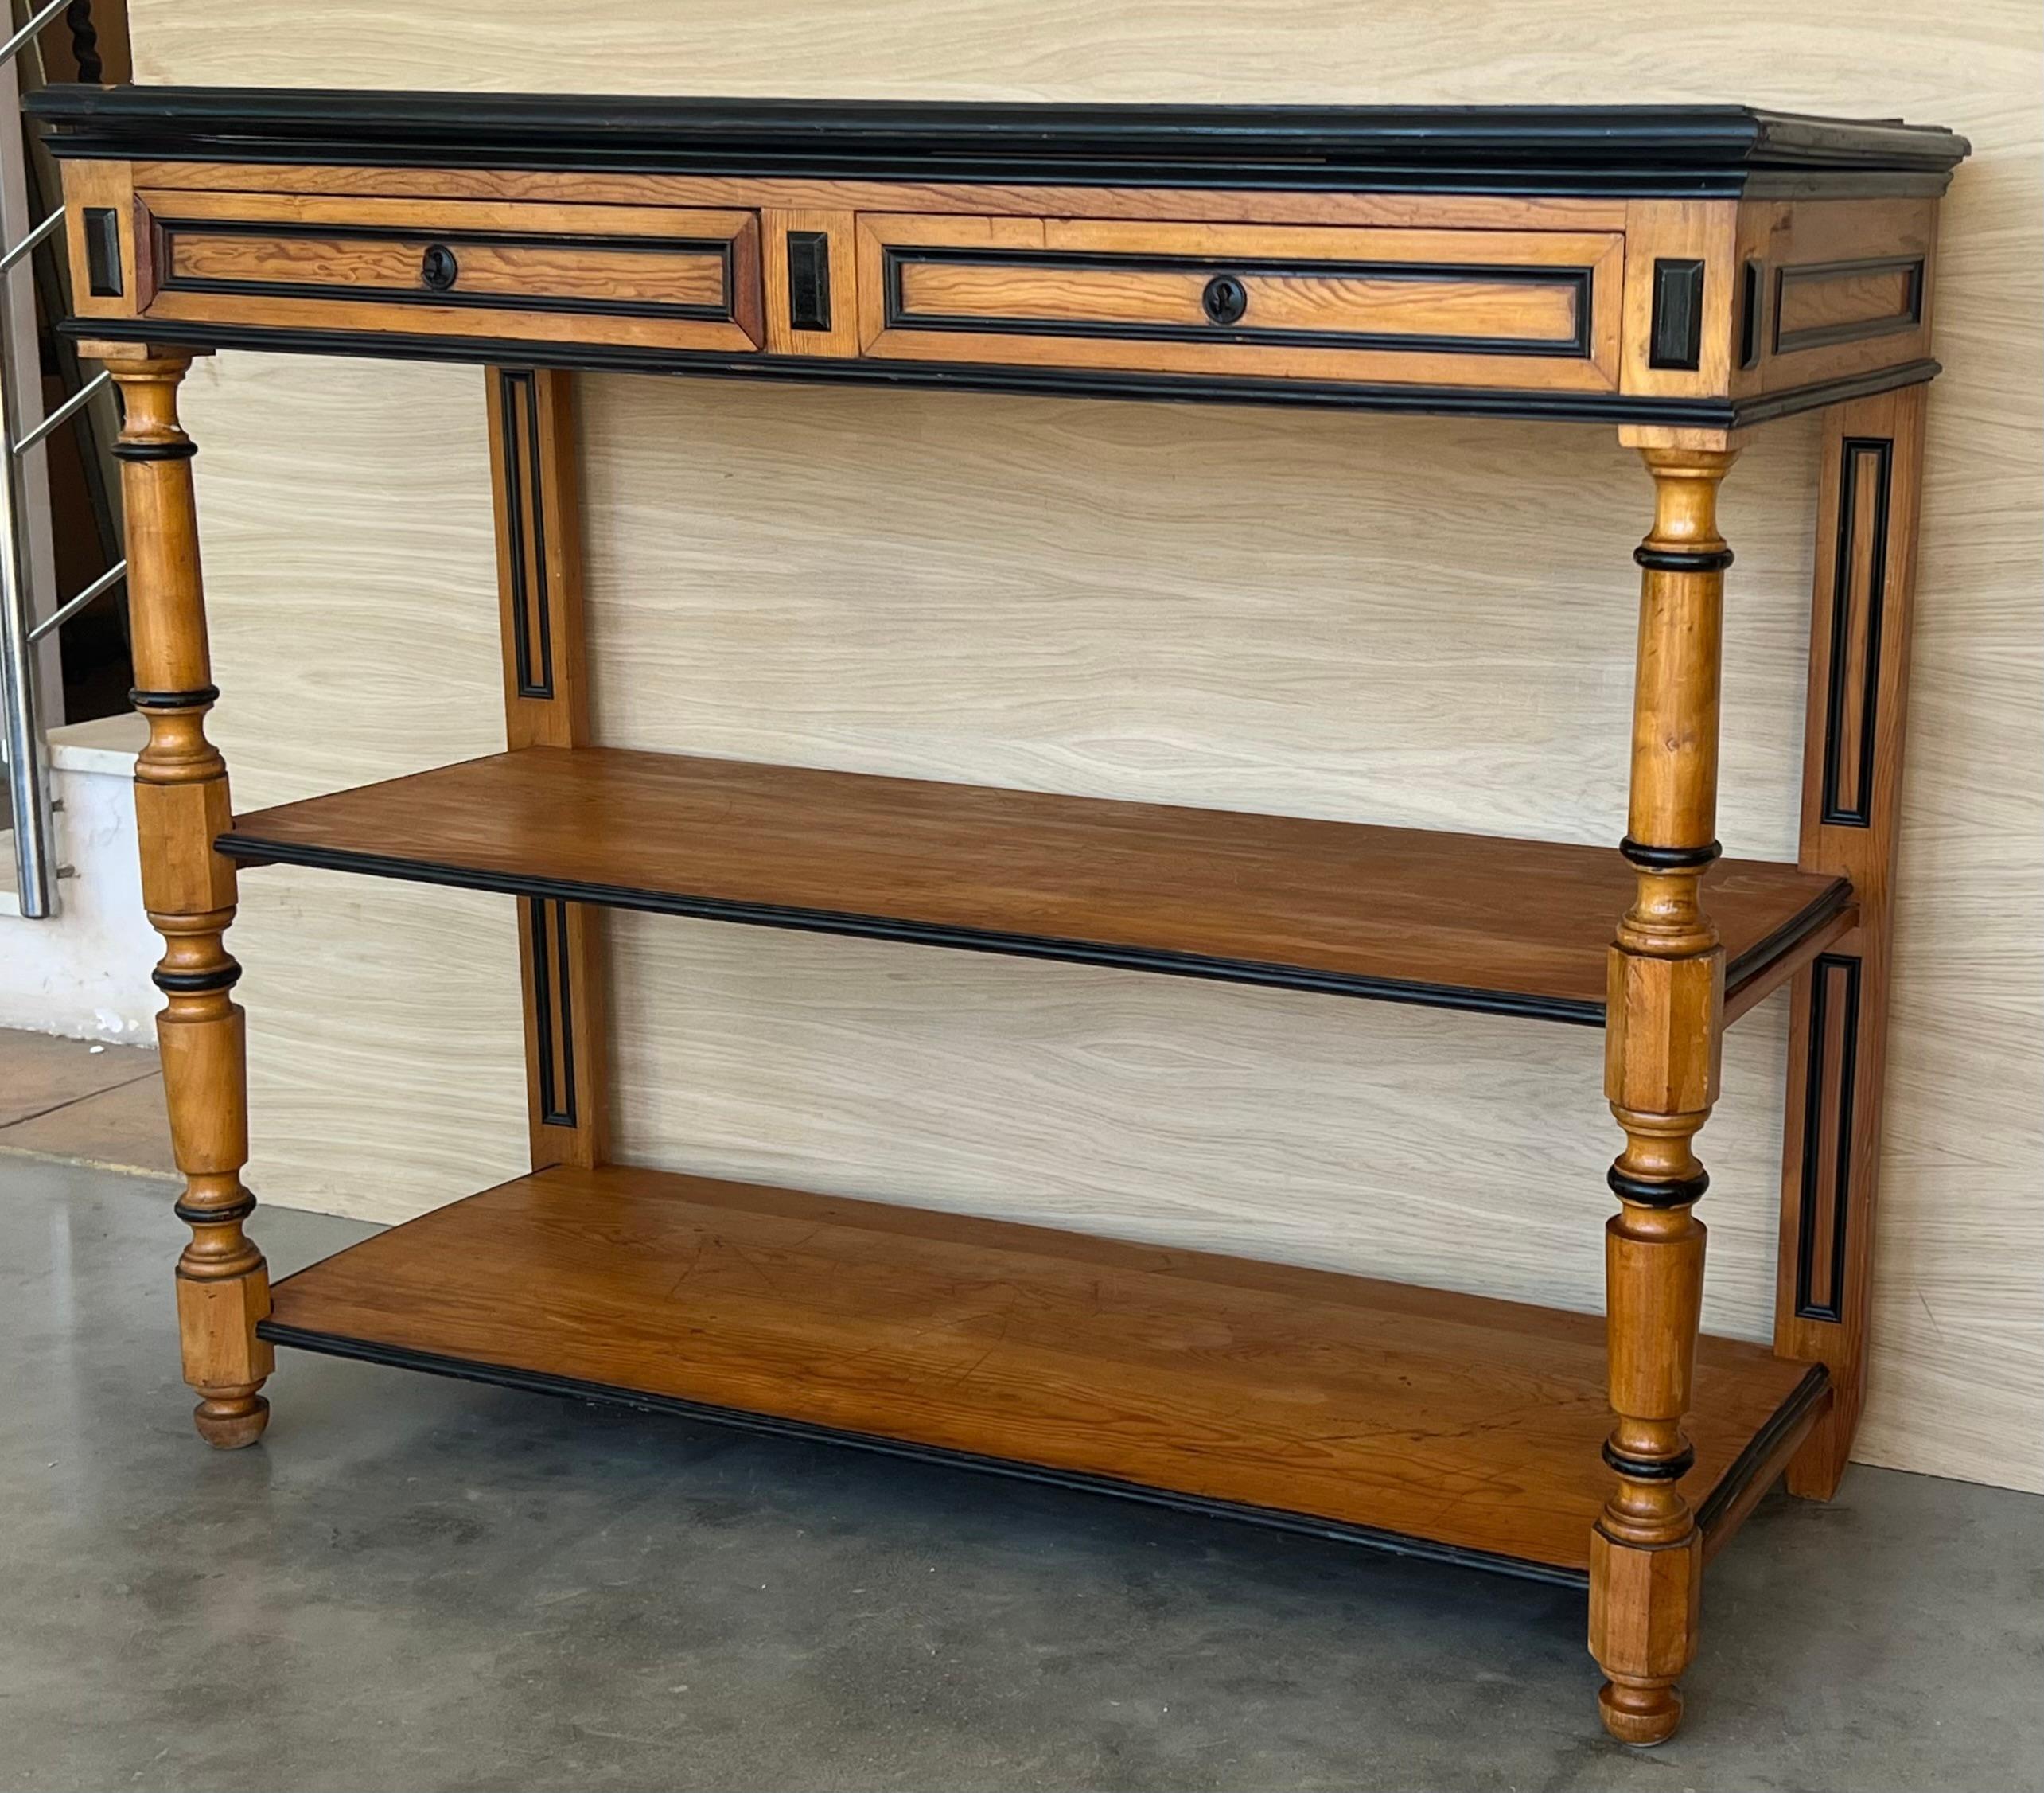 Fruitwood Early 20th C English Lemontree Three Tier Server or Buffet with Drawers For Sale